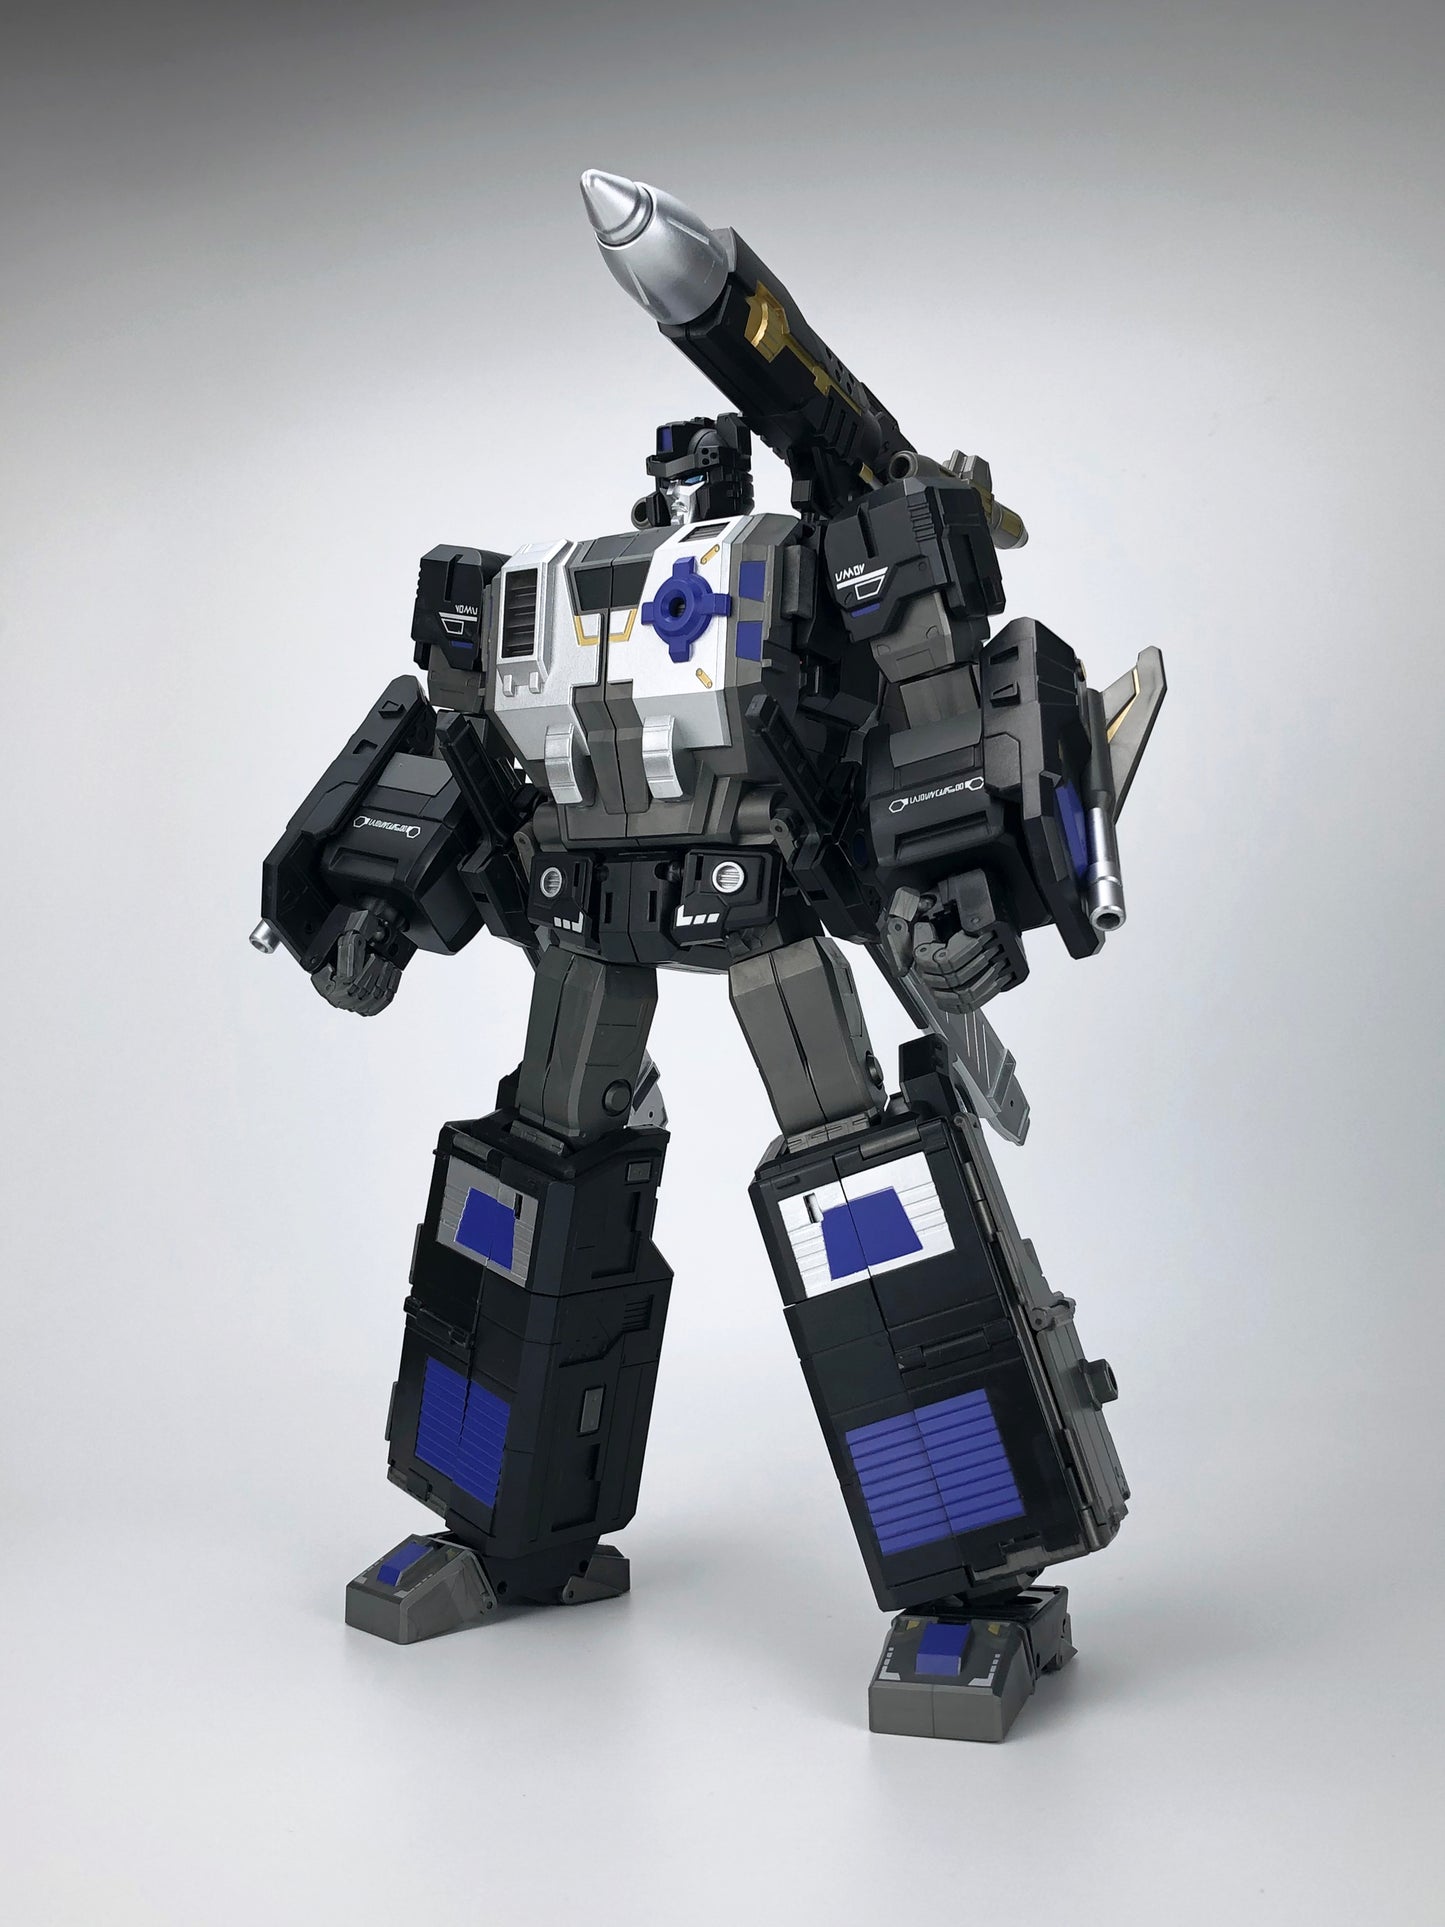 Fans Hobby presents the MB-011A Black God Armor as part of the Master Builder series!  This transforming figure converts from robot mode to trailer mode and back again. Black God Armor can be combined with the Master Builder MB-06A Black Power Baser figure (sold separately).